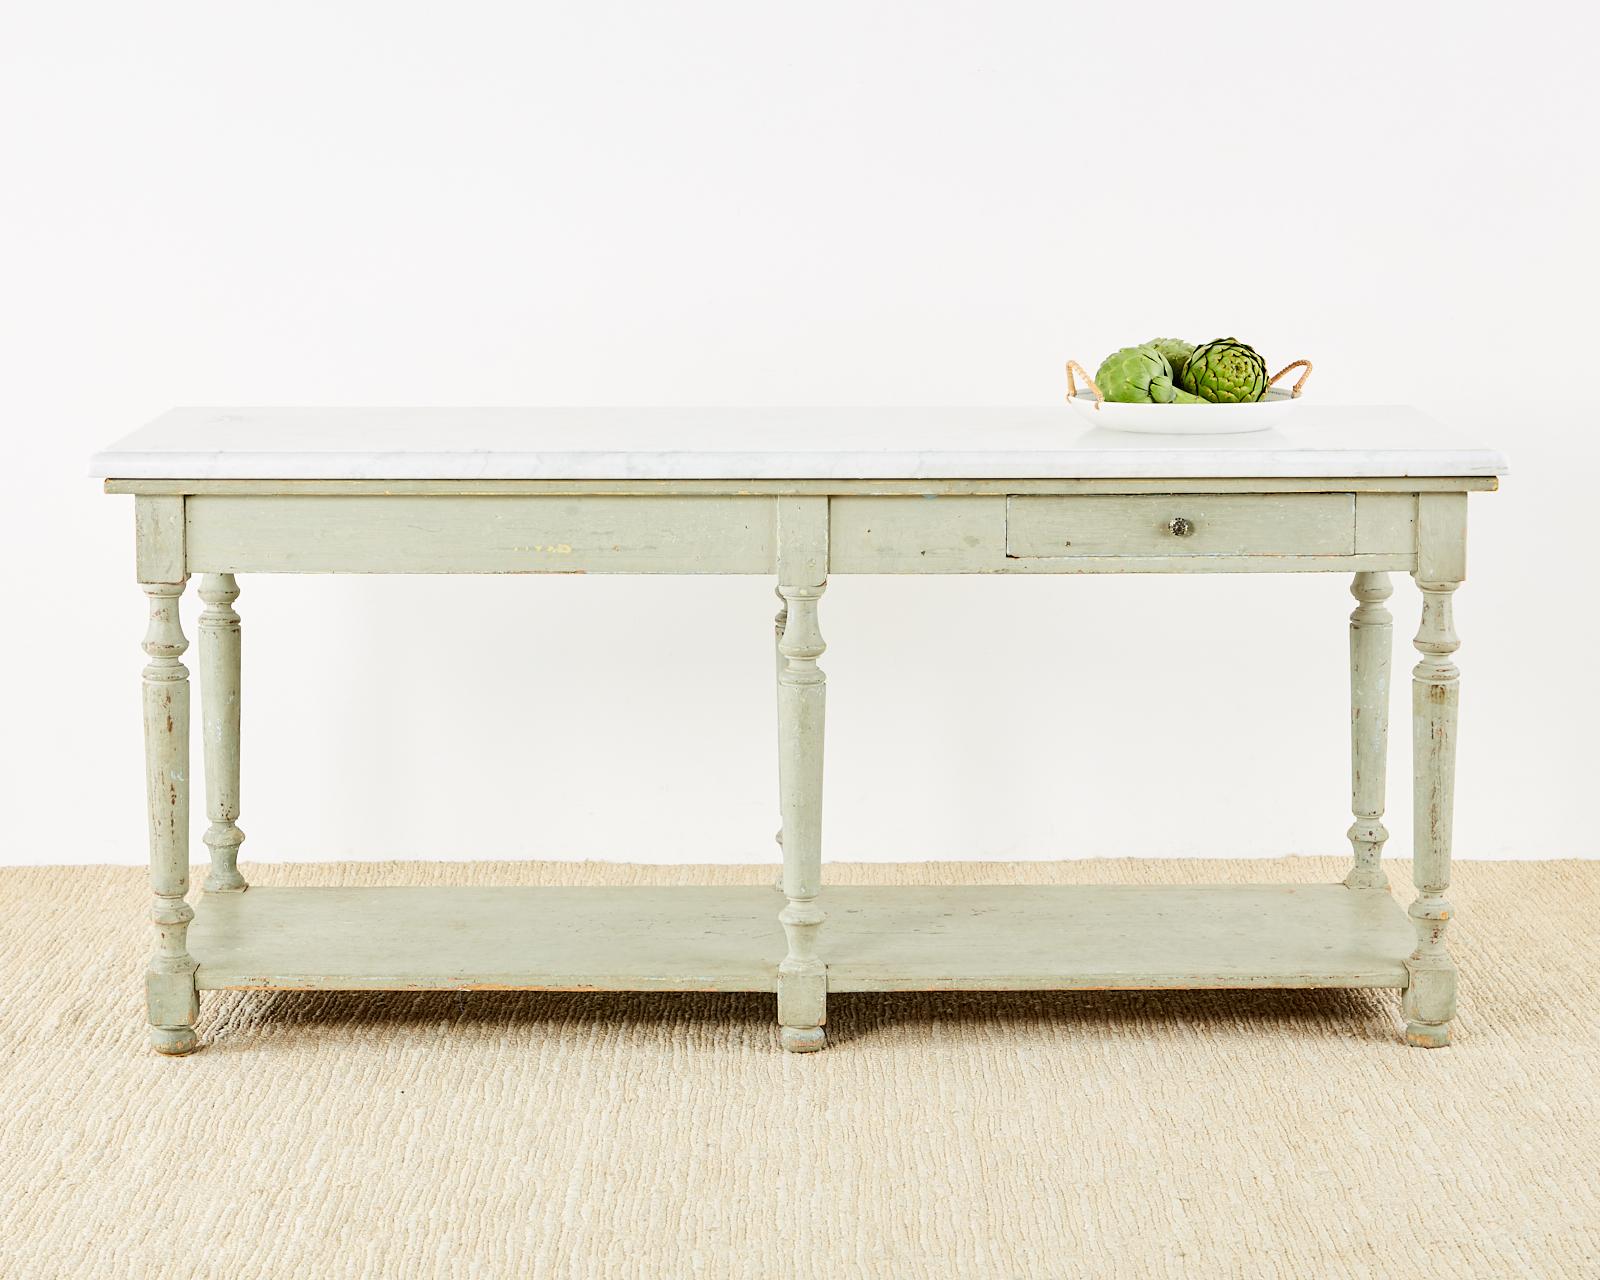 Rustic 19th century French baker's table or kitchen island featuring a large rectangular 1.5 inch thick slab of Italian Carrara marble. The large base measures 78 inches long by 27 inches wide with a distressed lacquer patina in a Gustavian style